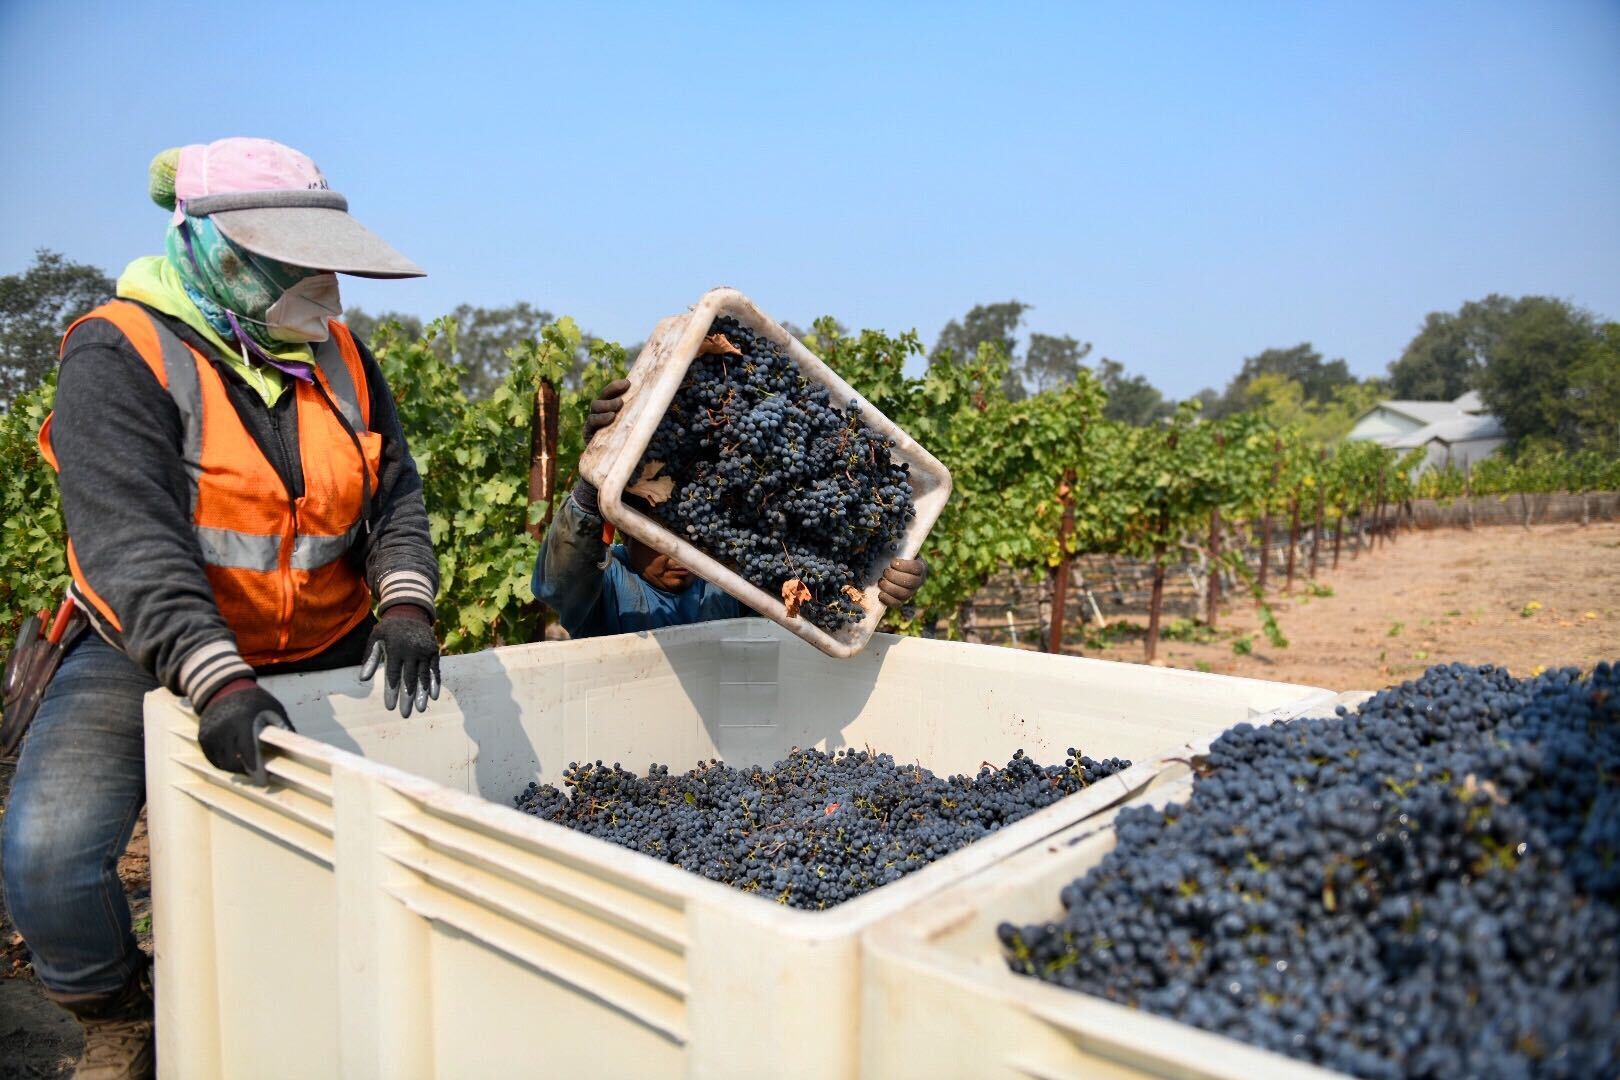 Workers harvest grapes at Garton Vineyards in Napa on Sept. 30, 2020.